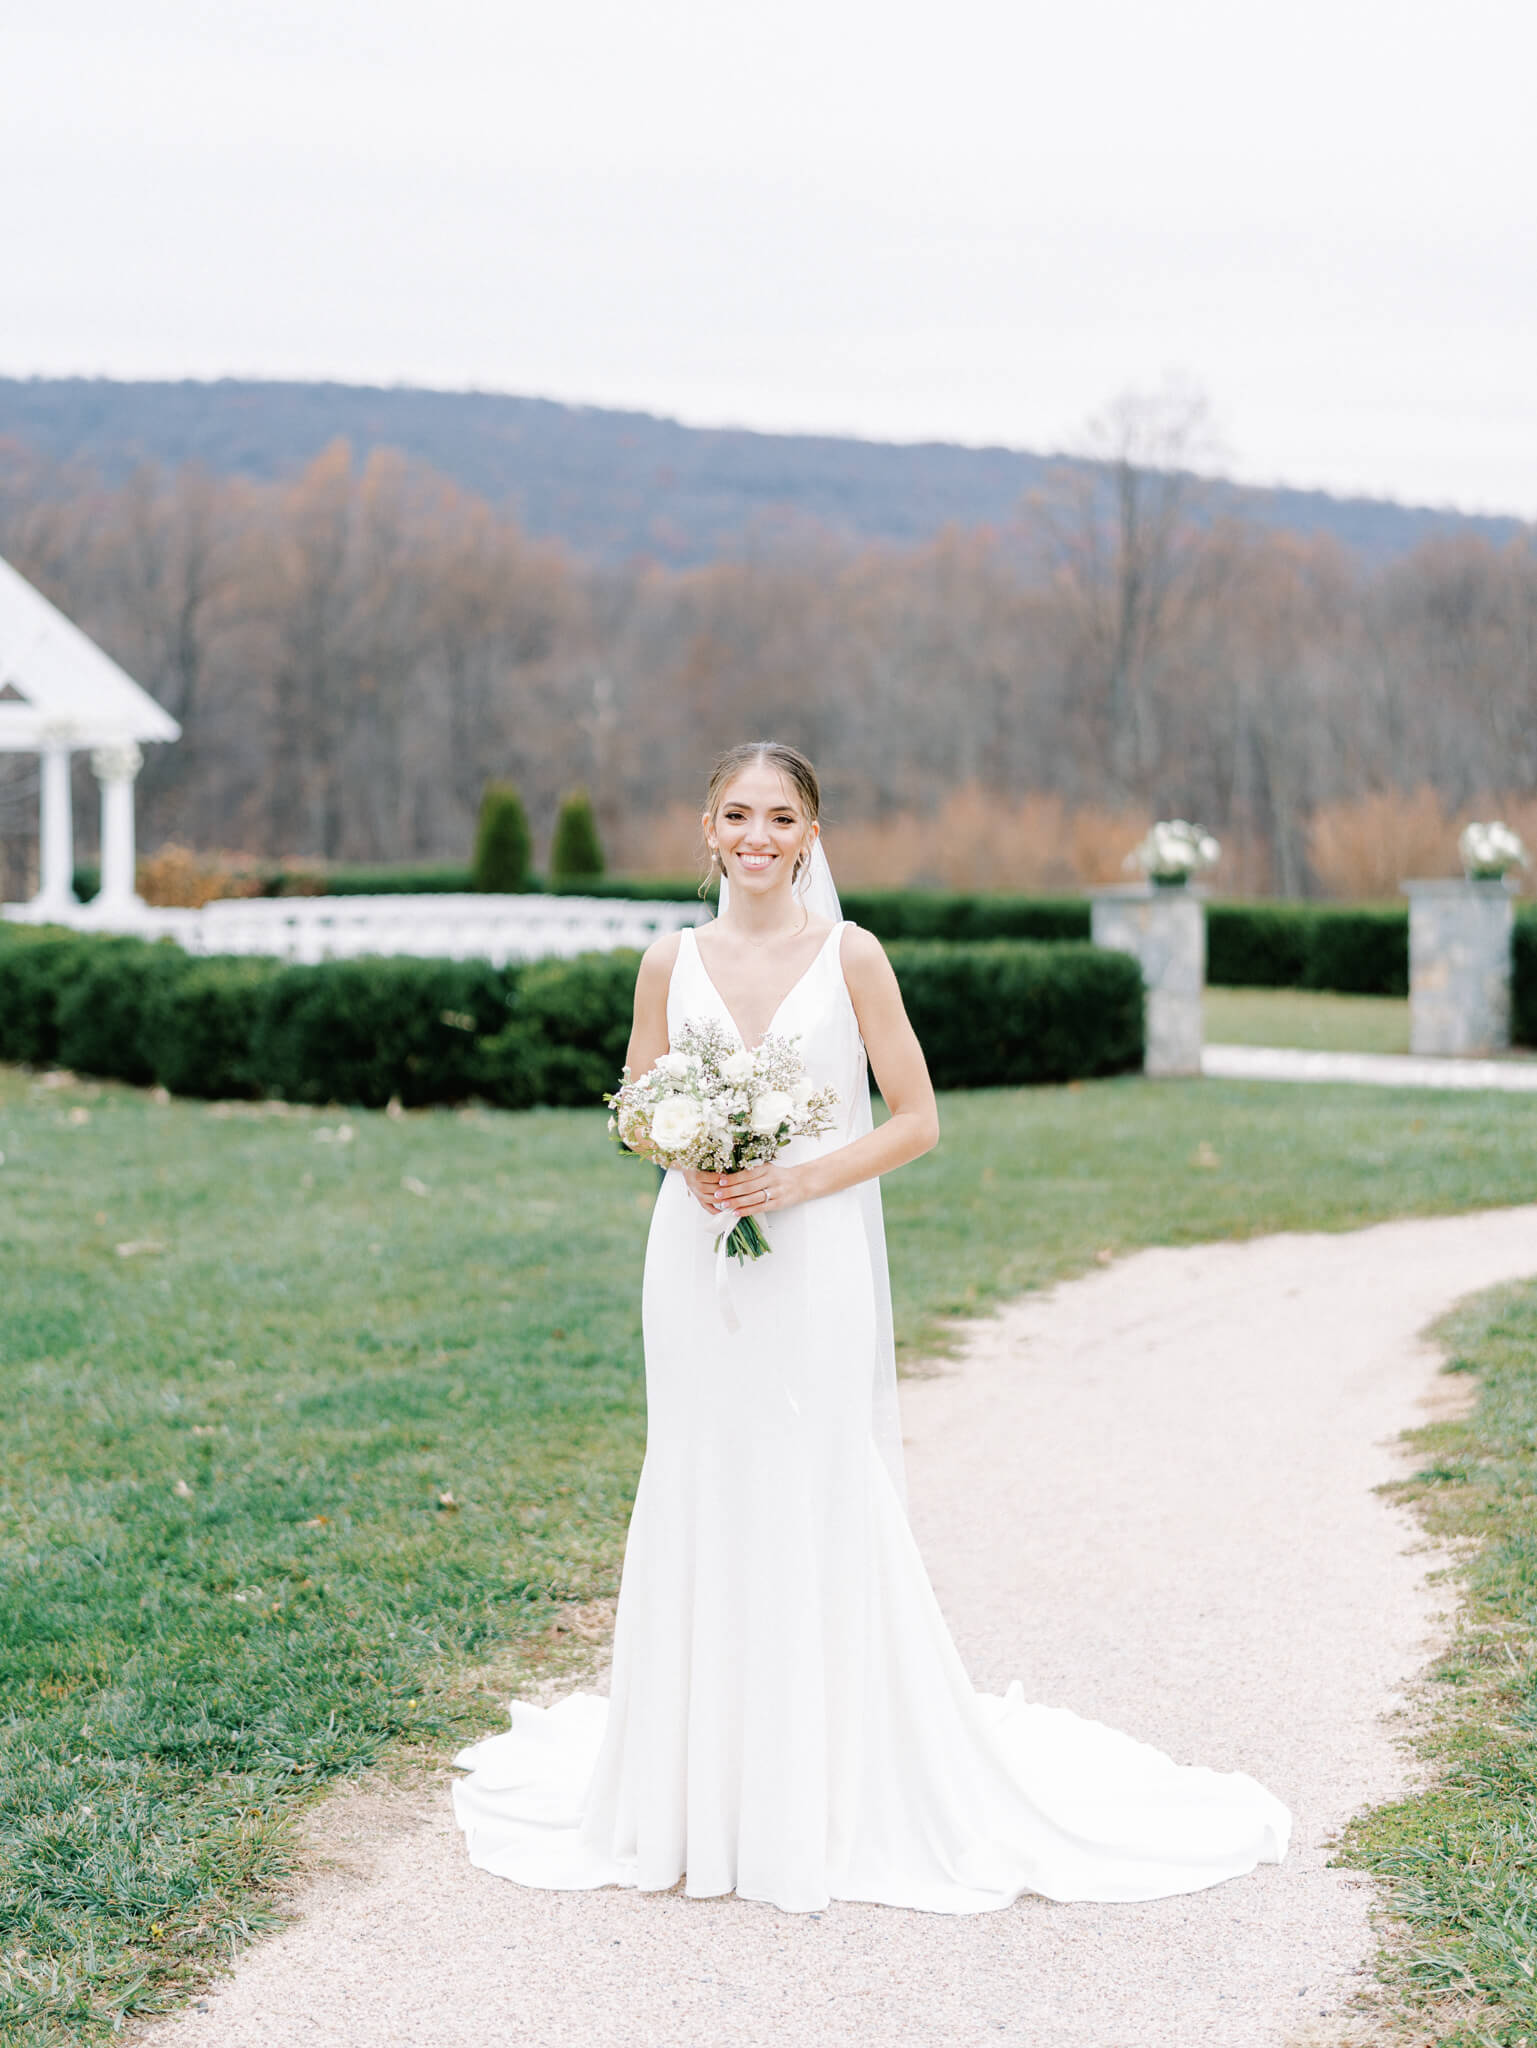 Full length portrait of a bride in her sleek gown holding her white bouquet in front of her ceremony site.